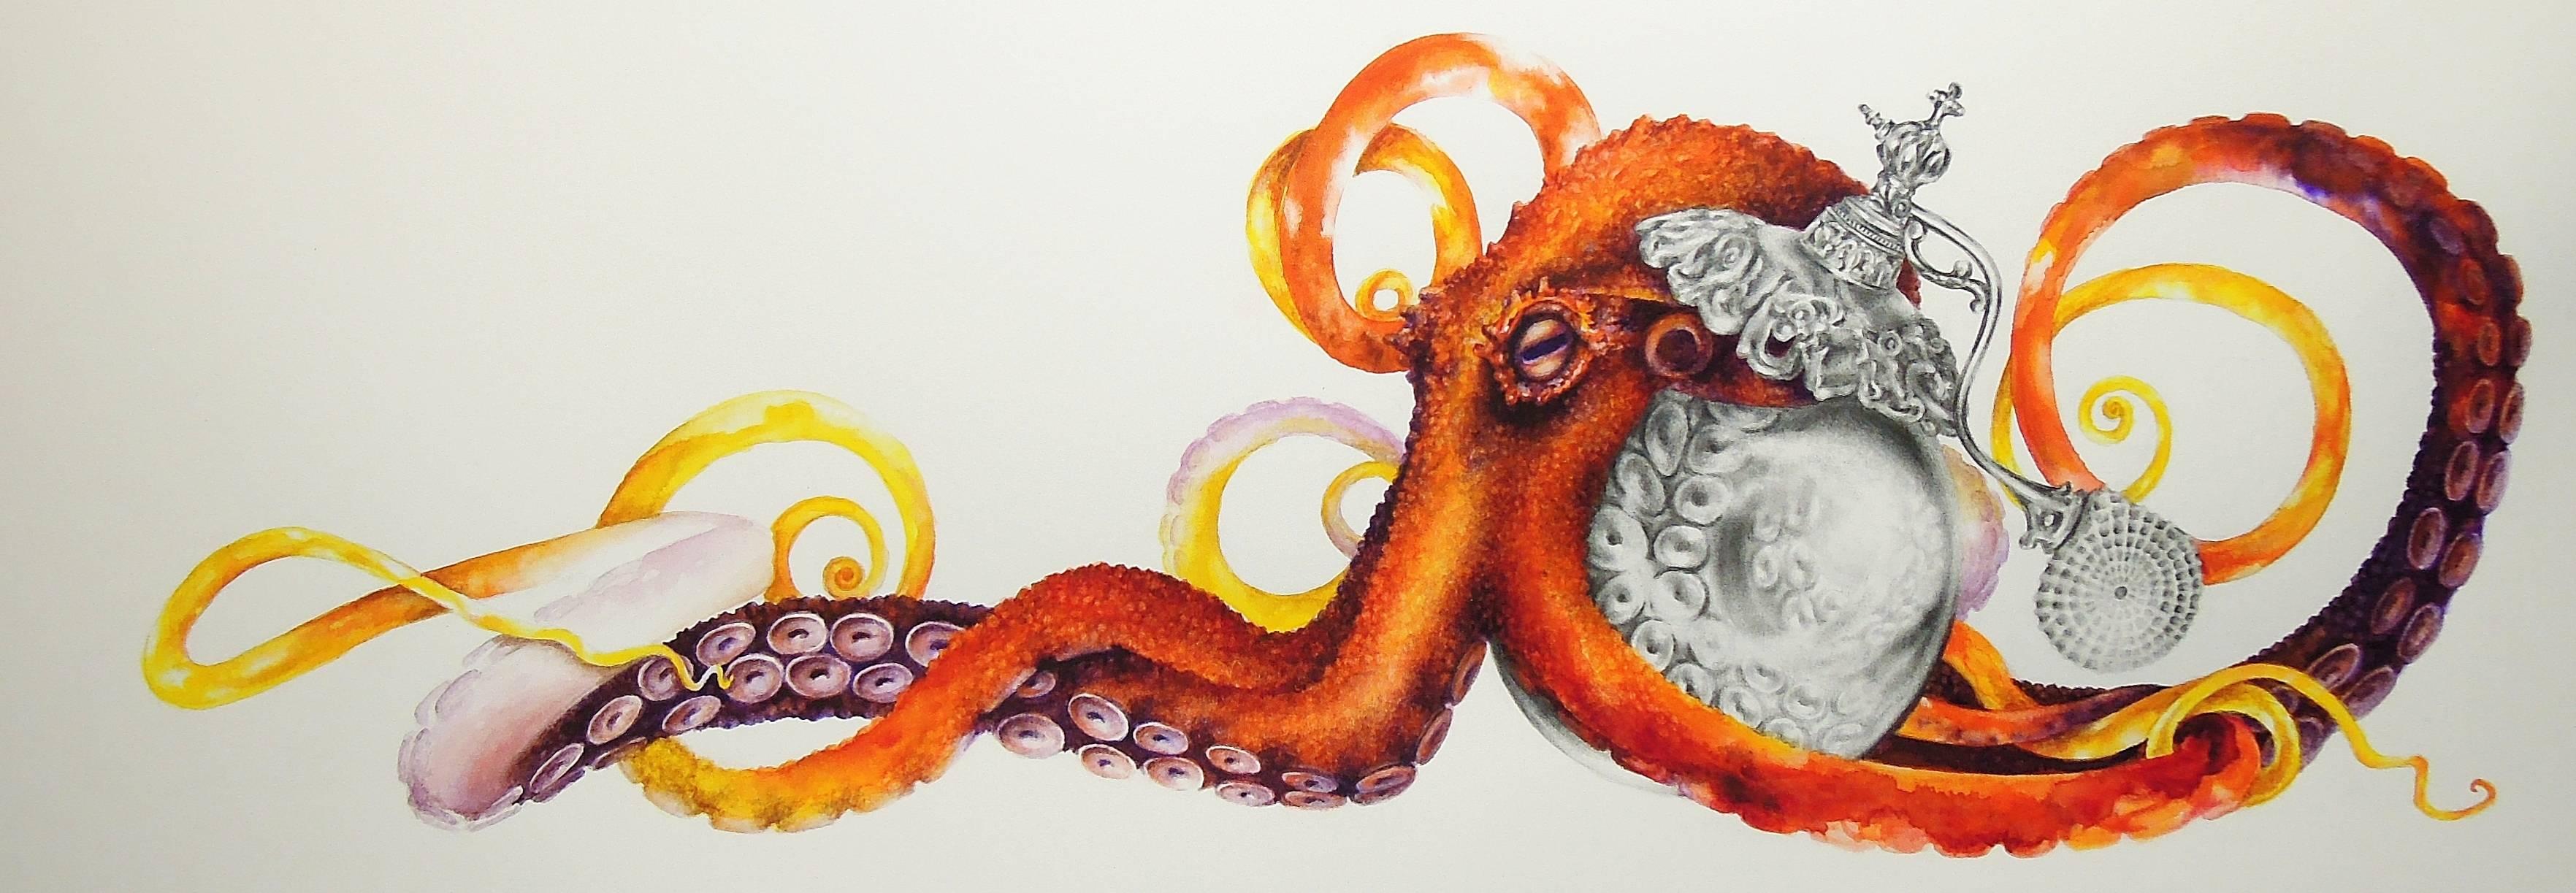 Francine Fox Animal Art - Perfume No. One, Drawing of Orange, Red Octopus and Perfume Bottle on White